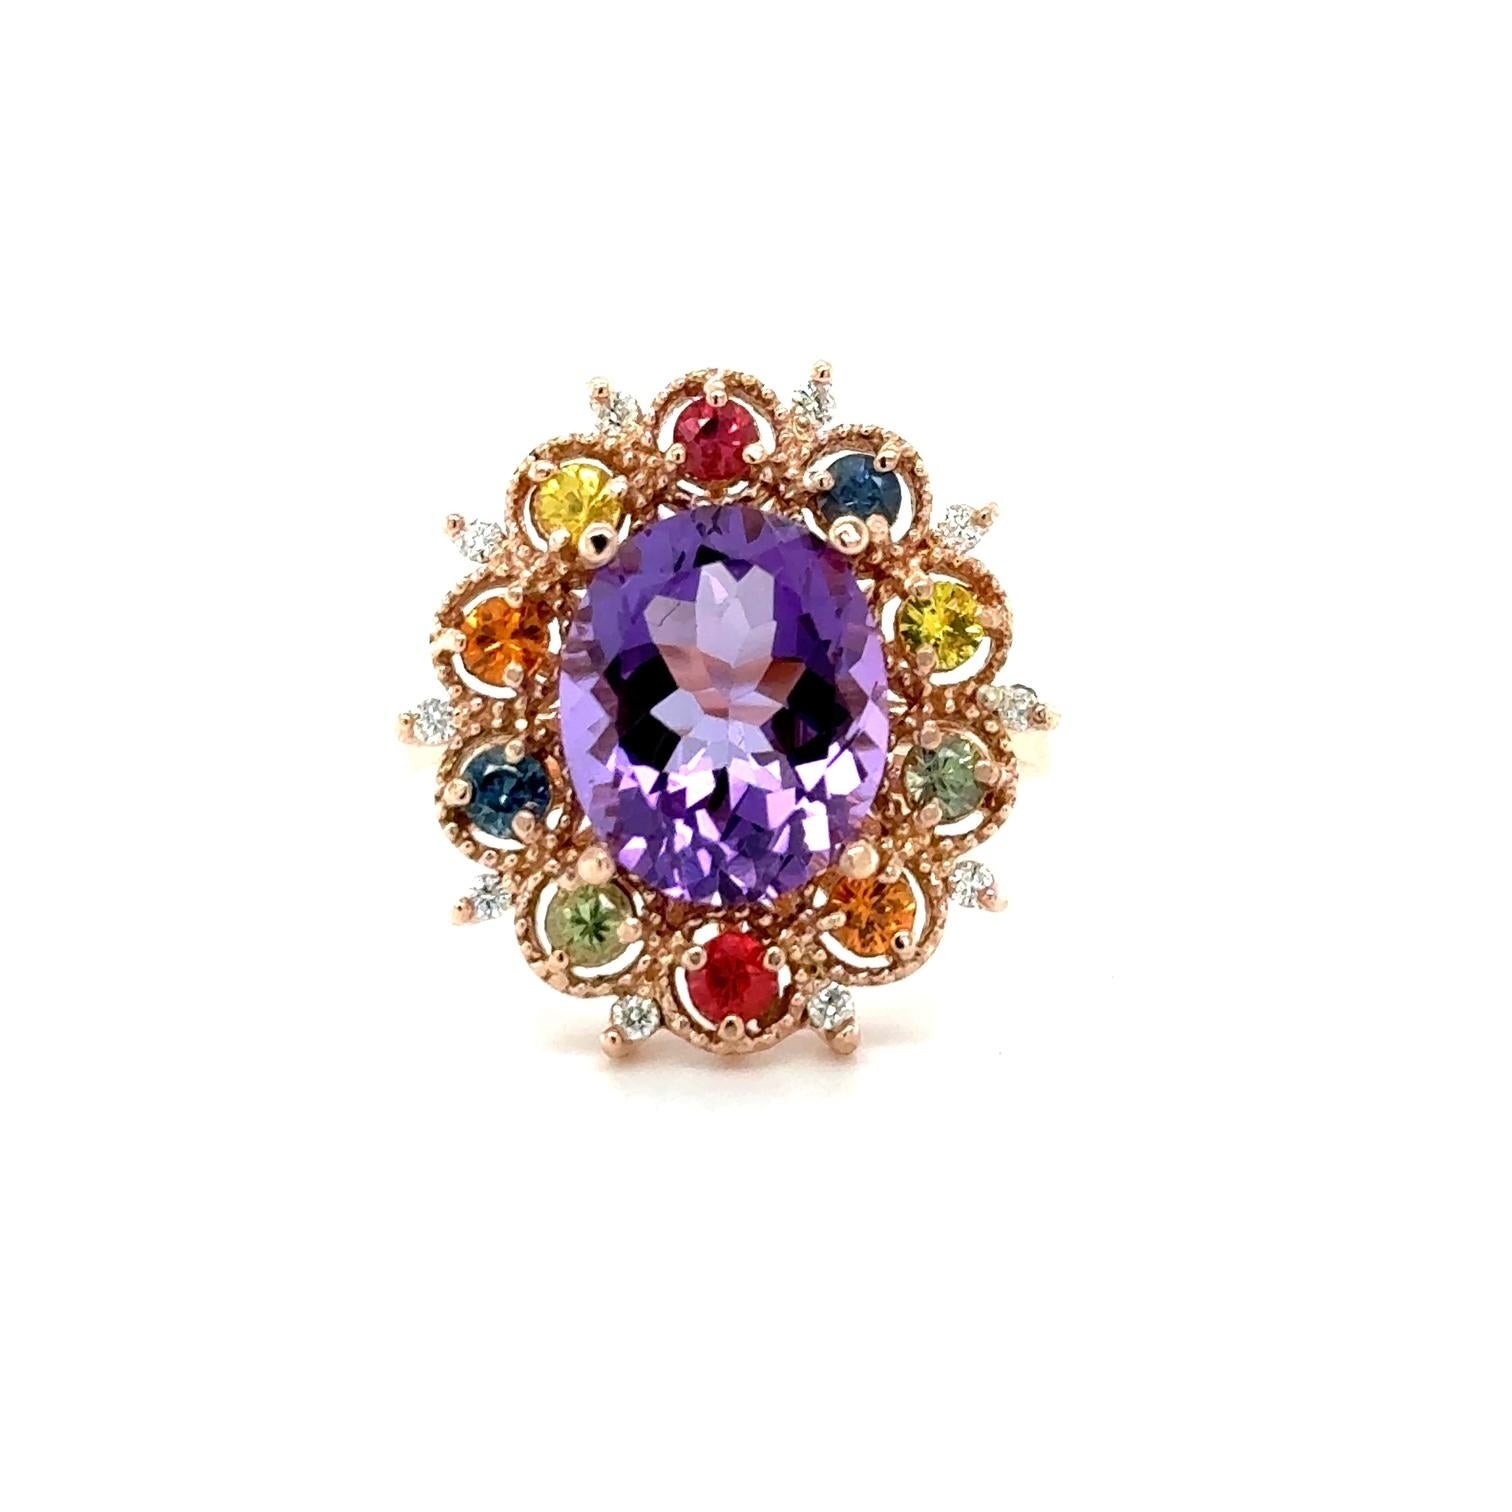 4.98 Carat Oval Cut Amethyst Diamond Sapphire Rose Gold Cocktail Ring

This beautiful vintage inspired setting with a modern colorful theme has an Oval Cut Amethyst weighing 3.93 carats and is surrounded by 10 Round Cut Multi-Colored Sapphires that